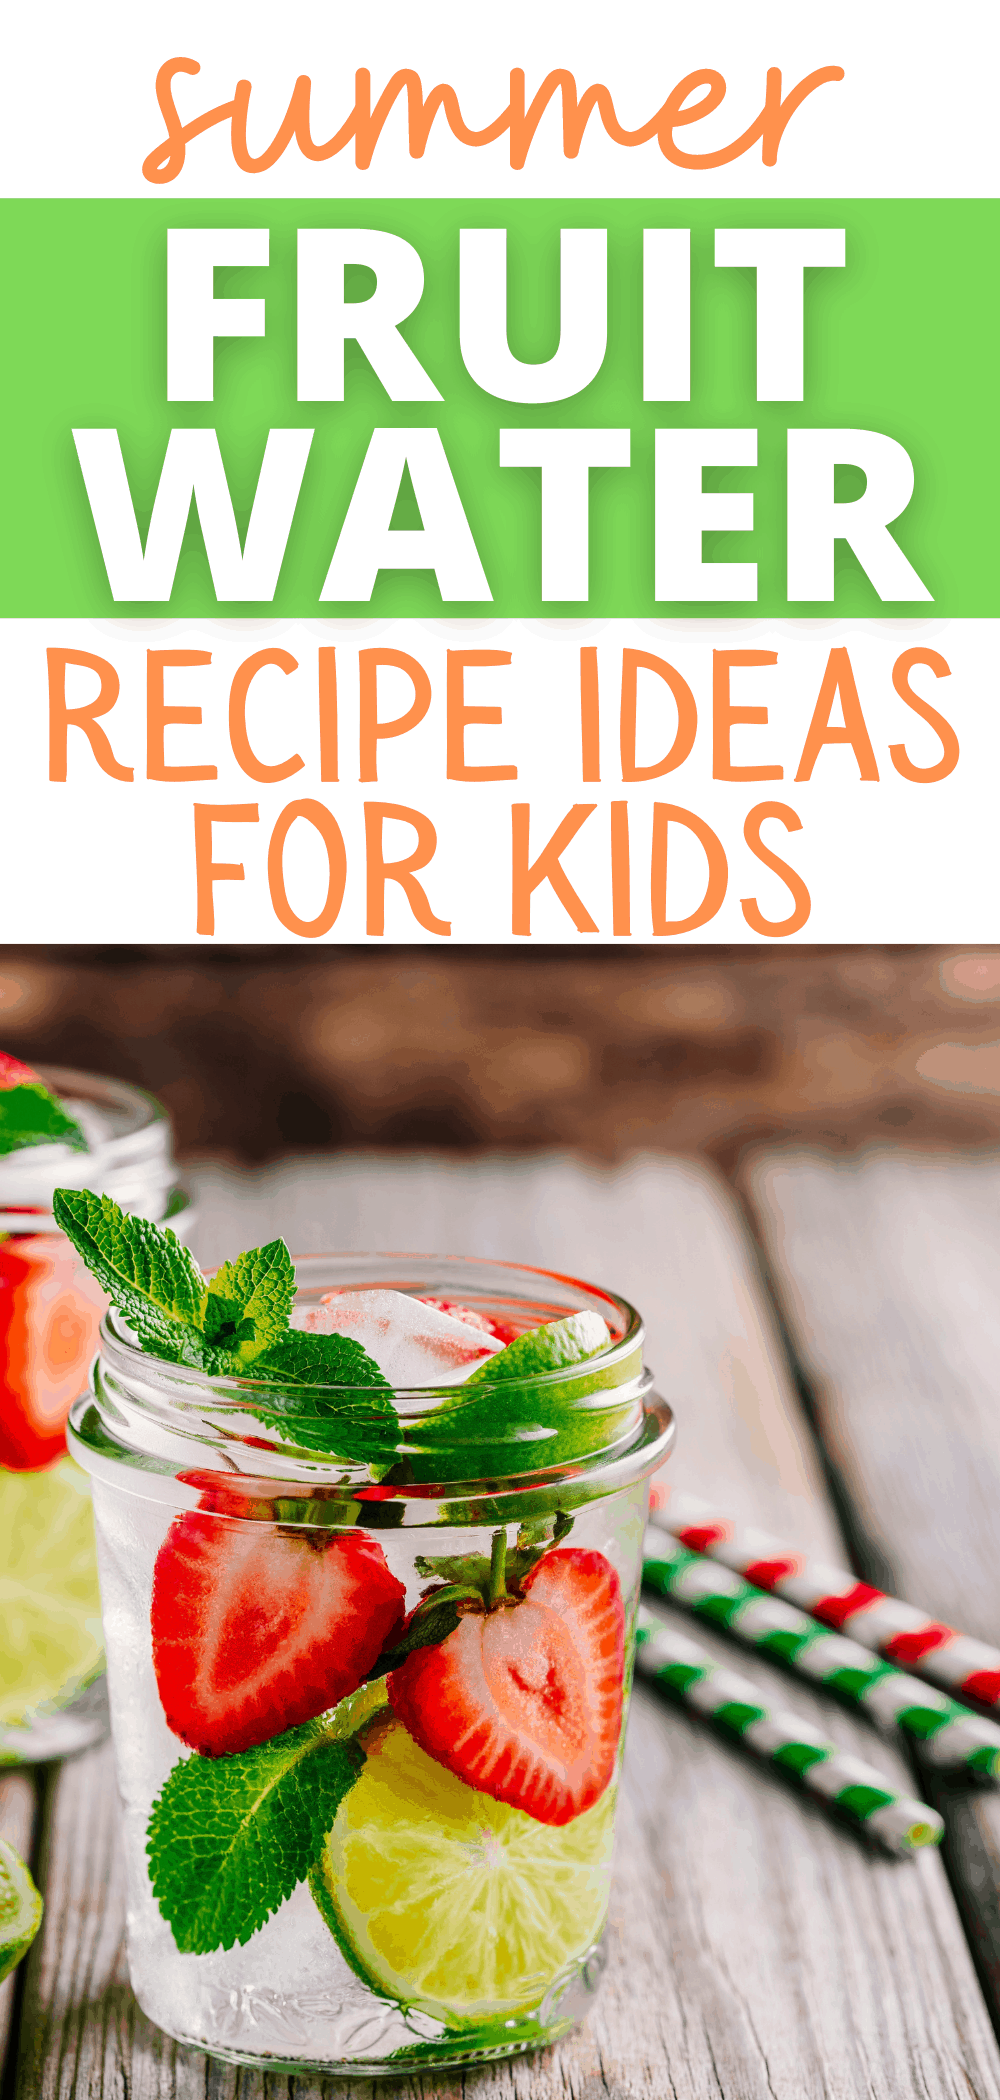 FRUIT WATER RECIPES FOR KIDS (summer fruit infused water ideas) fruit water infusions in mason jars sitting on table